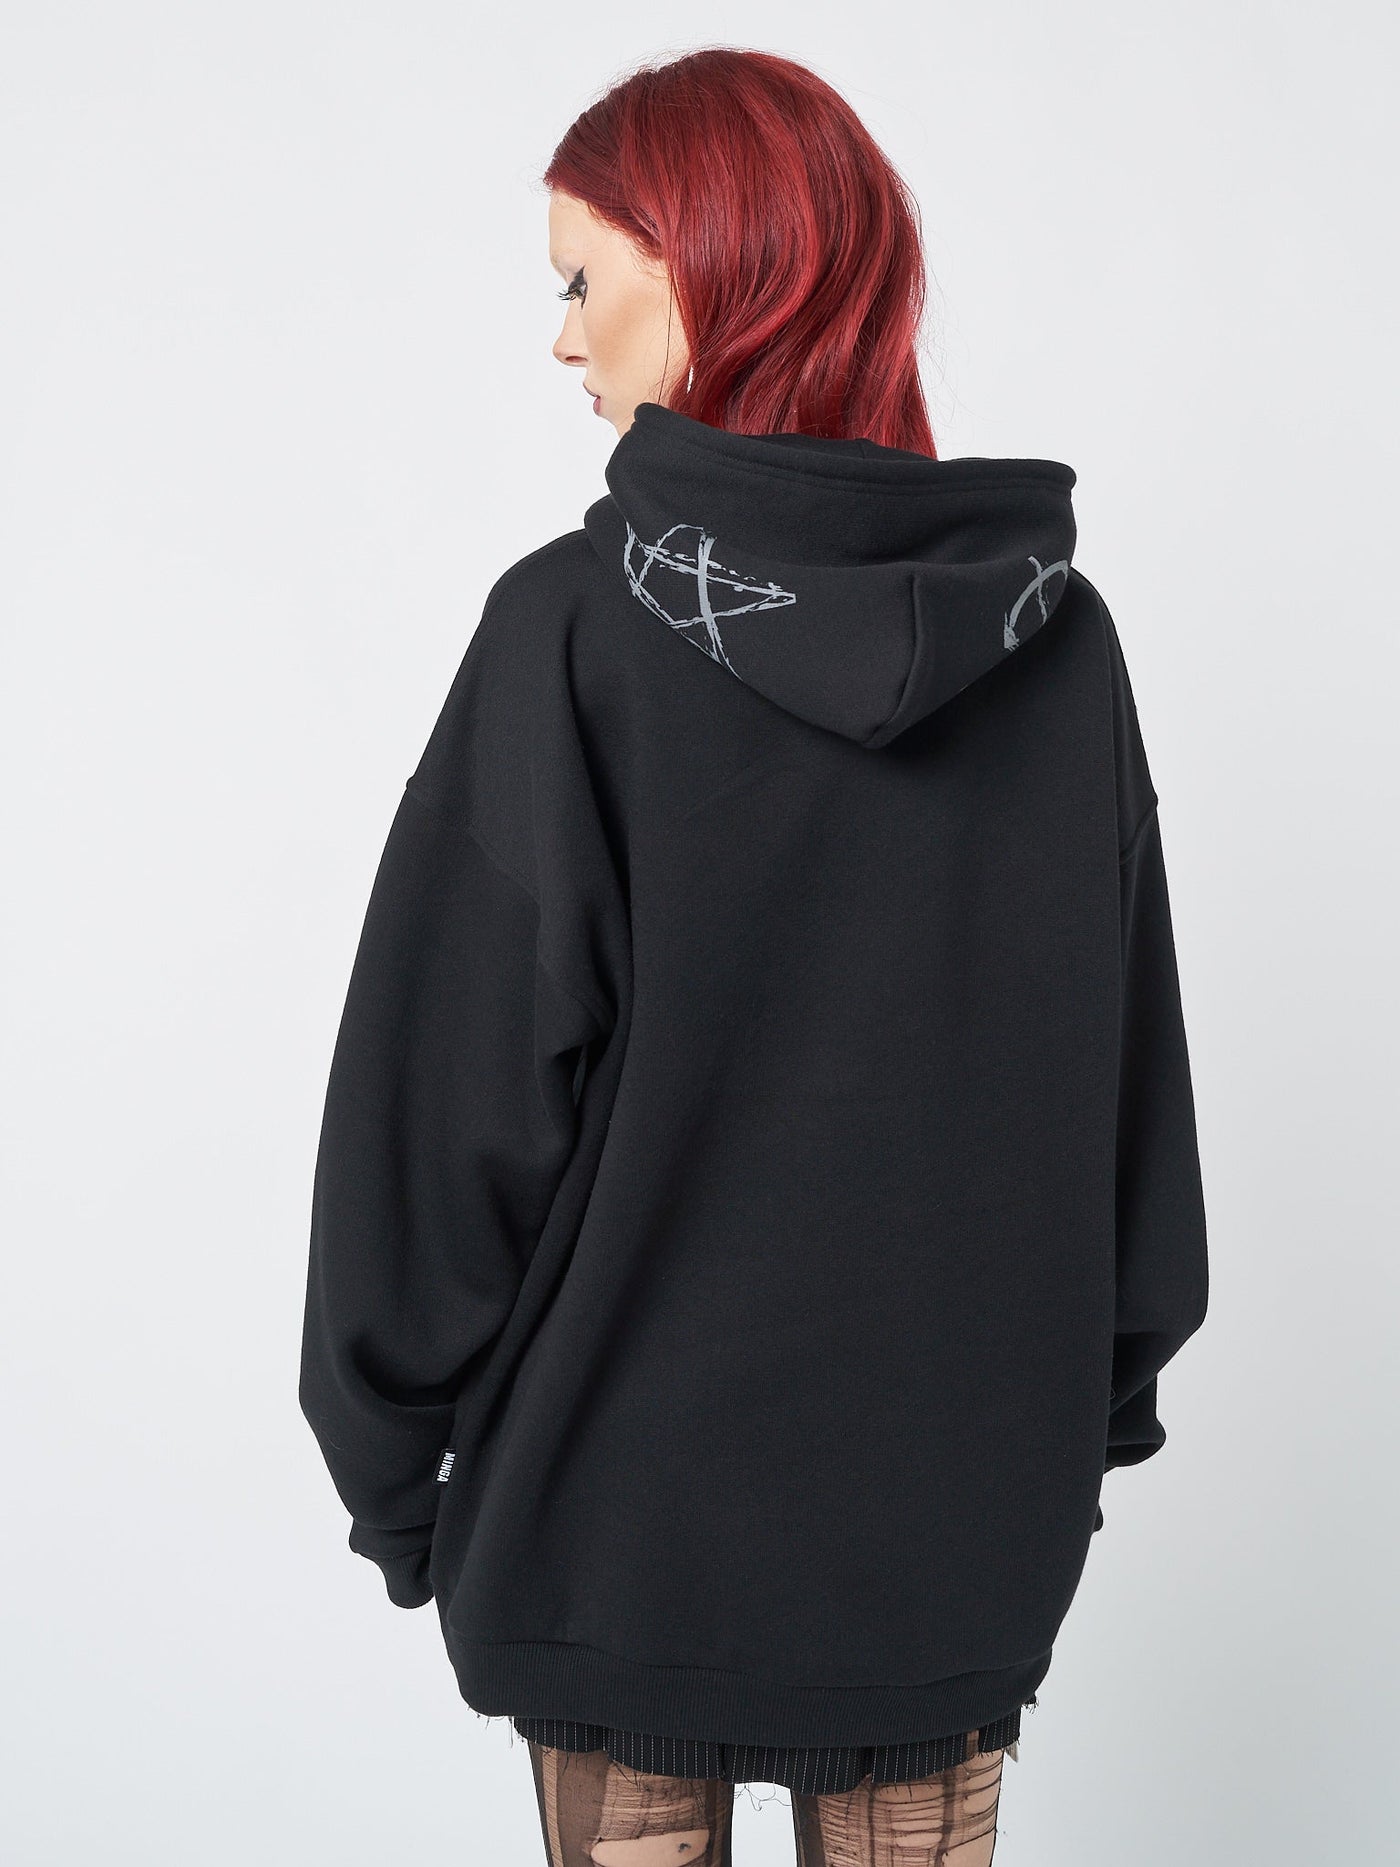 Troublemaker Patches Black Hoodie | Minga London